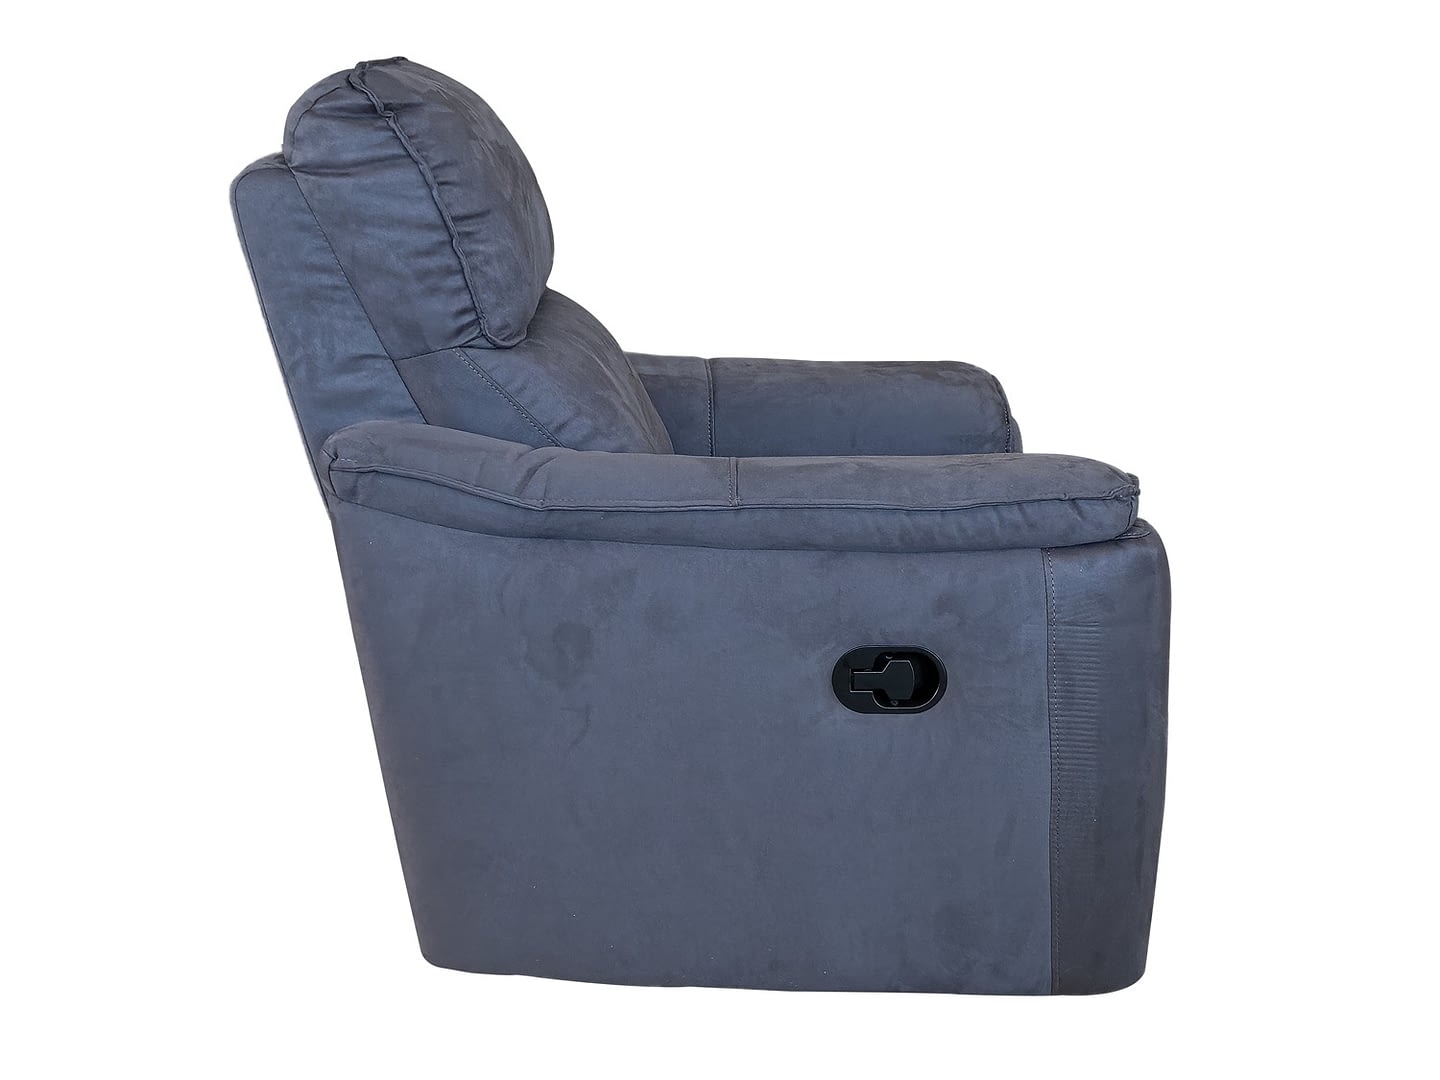 RIVIERA Recliner Chair - Side